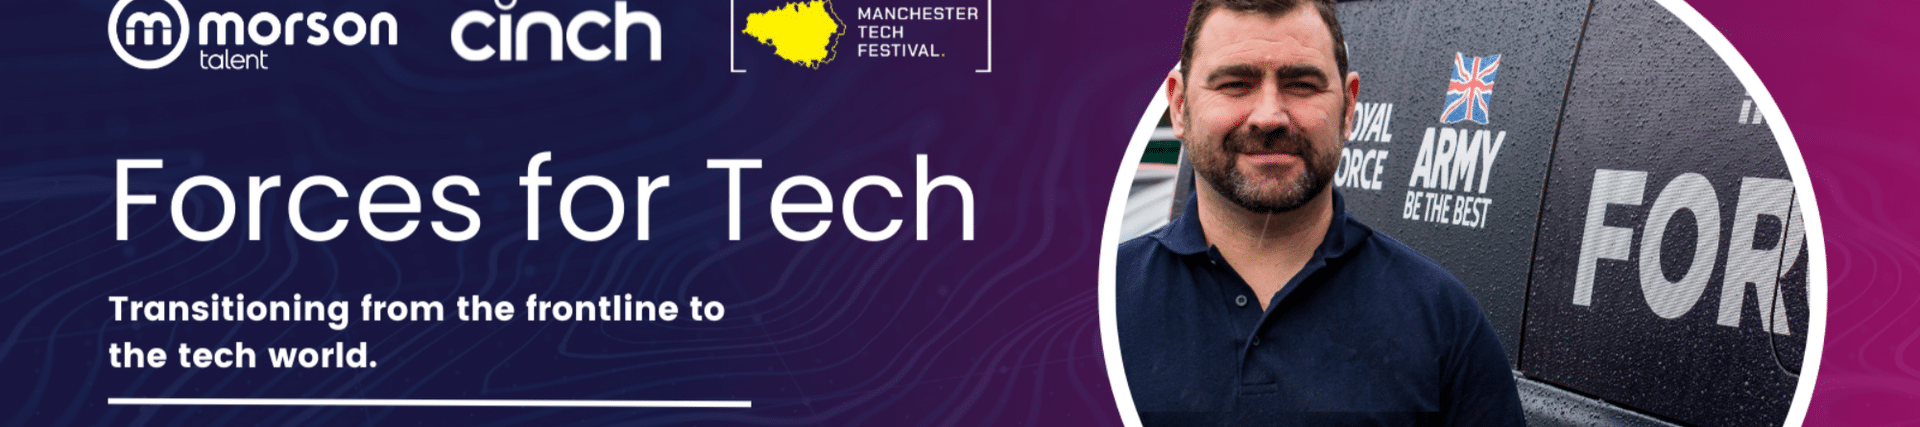 Event: 'Forces for Tech' with Techs and the City & Cinch